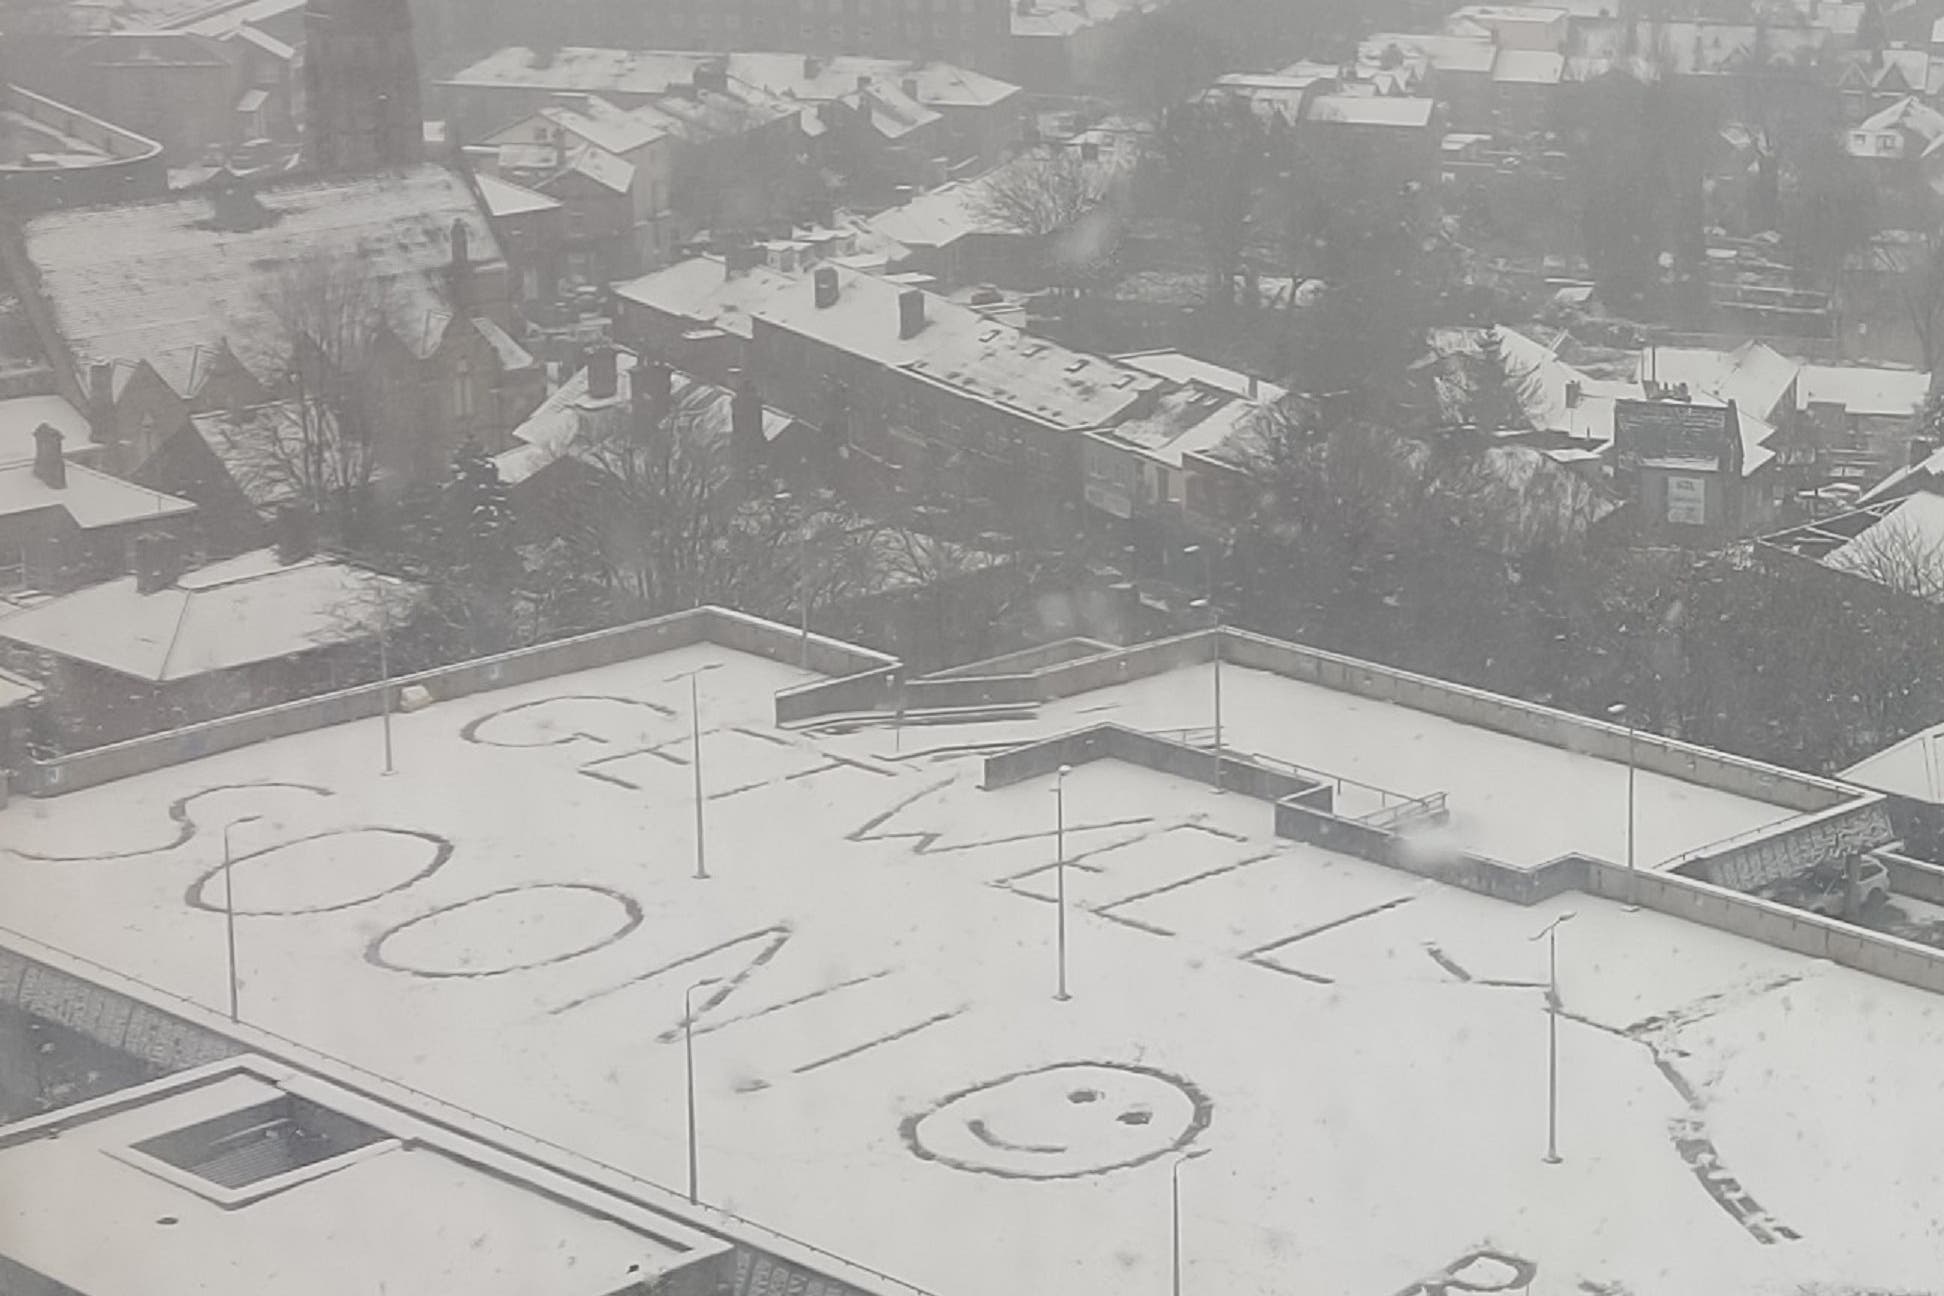 A message written on top of a car park in the snow outside Royal Hallamshire Hospital